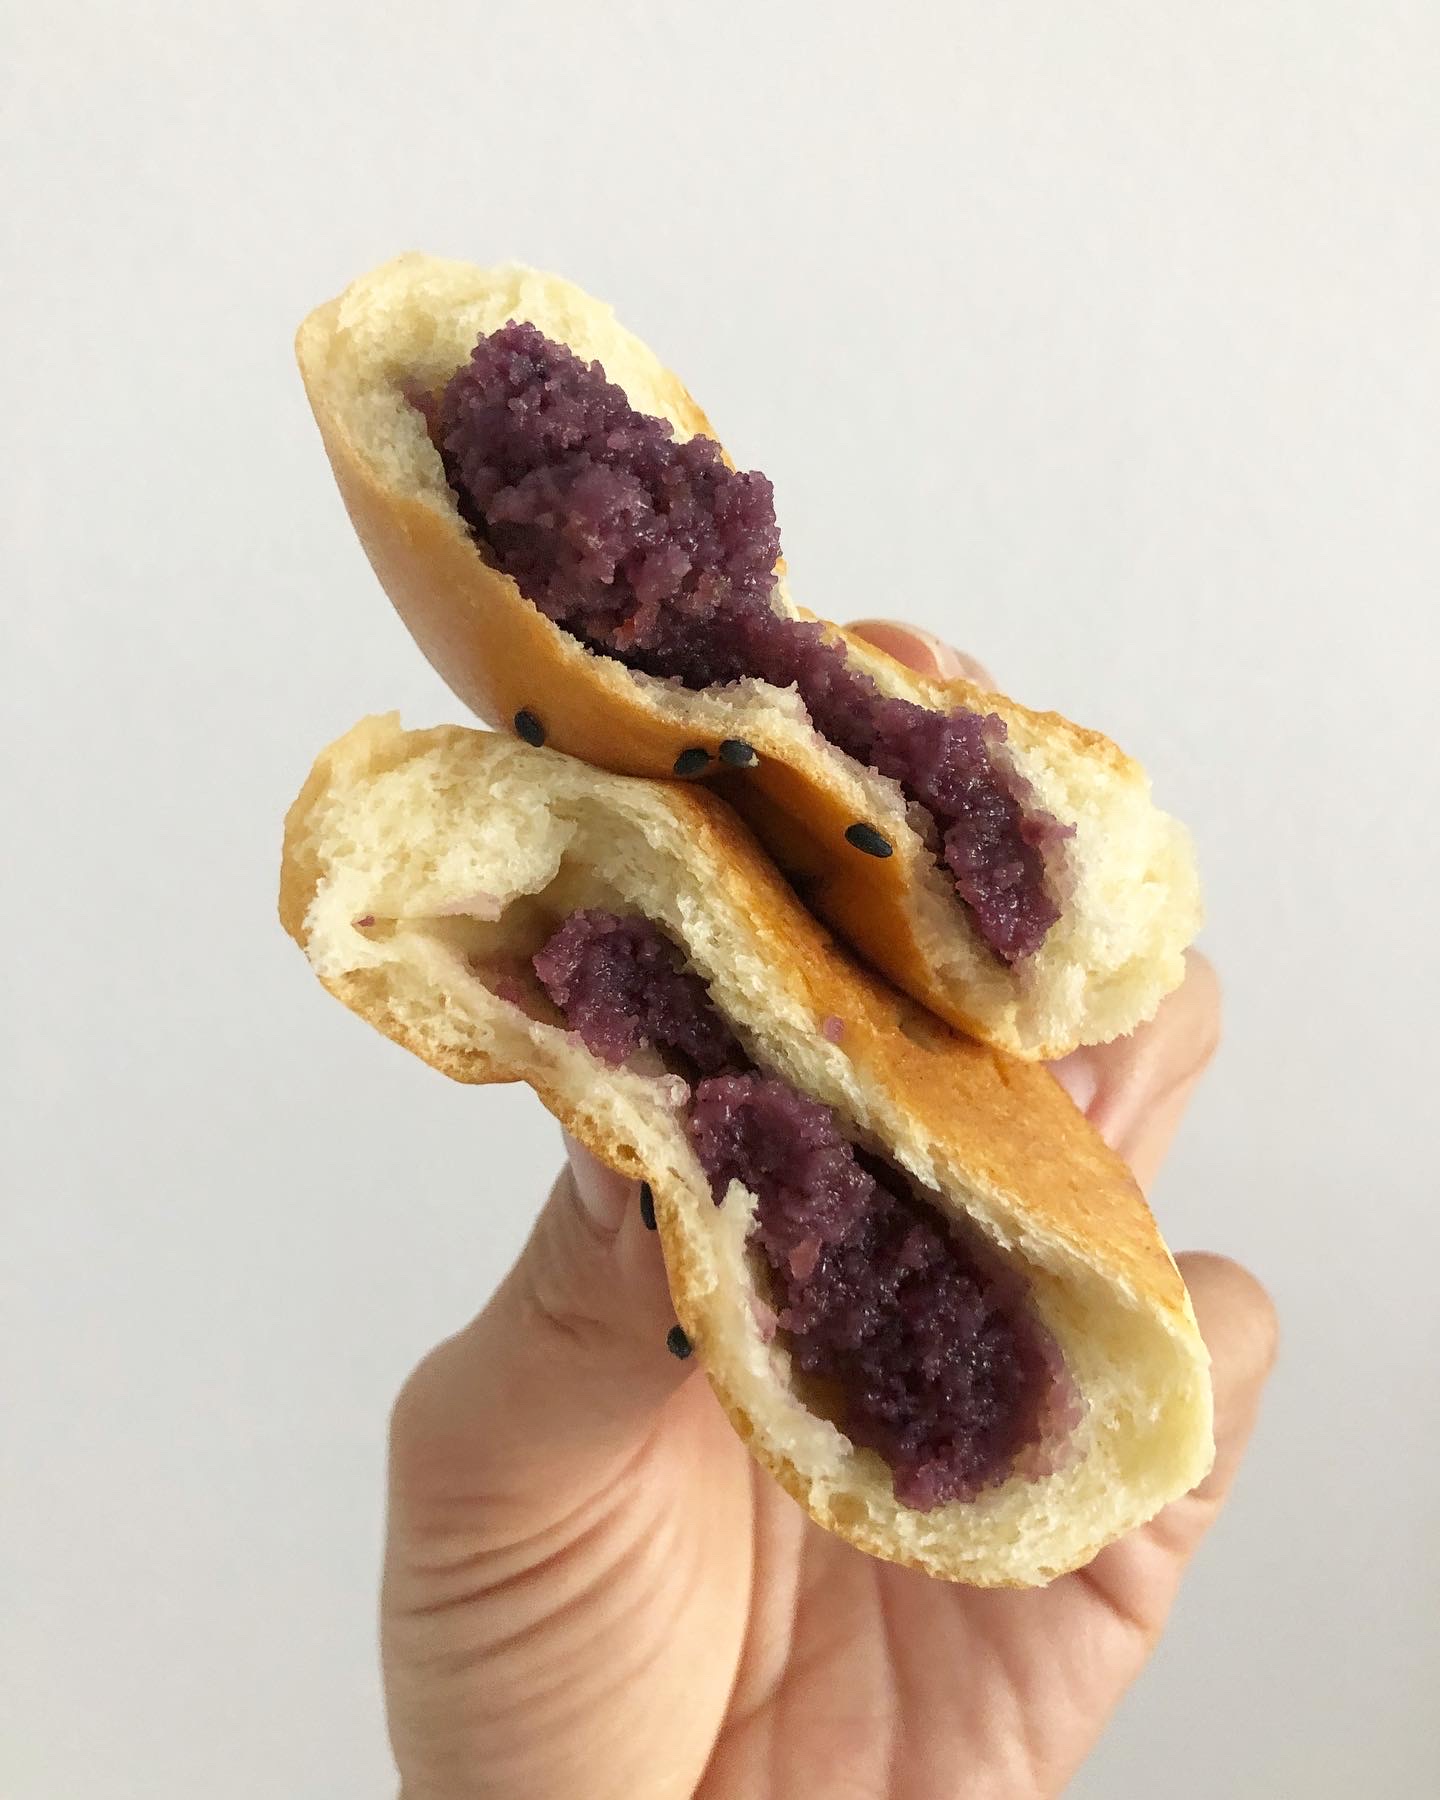 Baked Ube Bun [Sourdough or Yeasted]